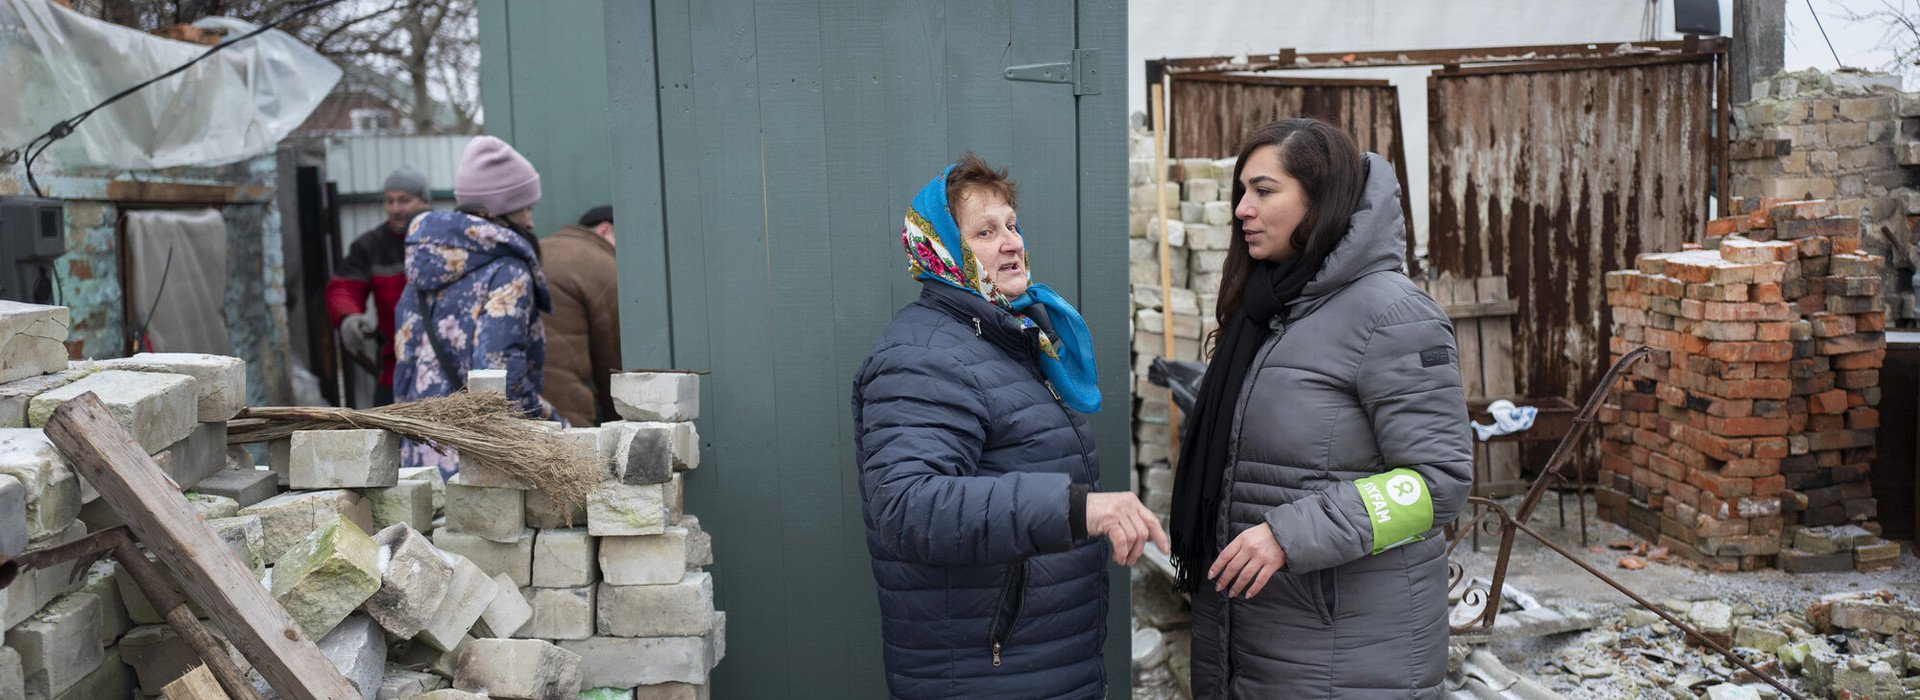 Delivery of an Oxfam latrine to a community damaged by shelling and bombardment in Ukraine